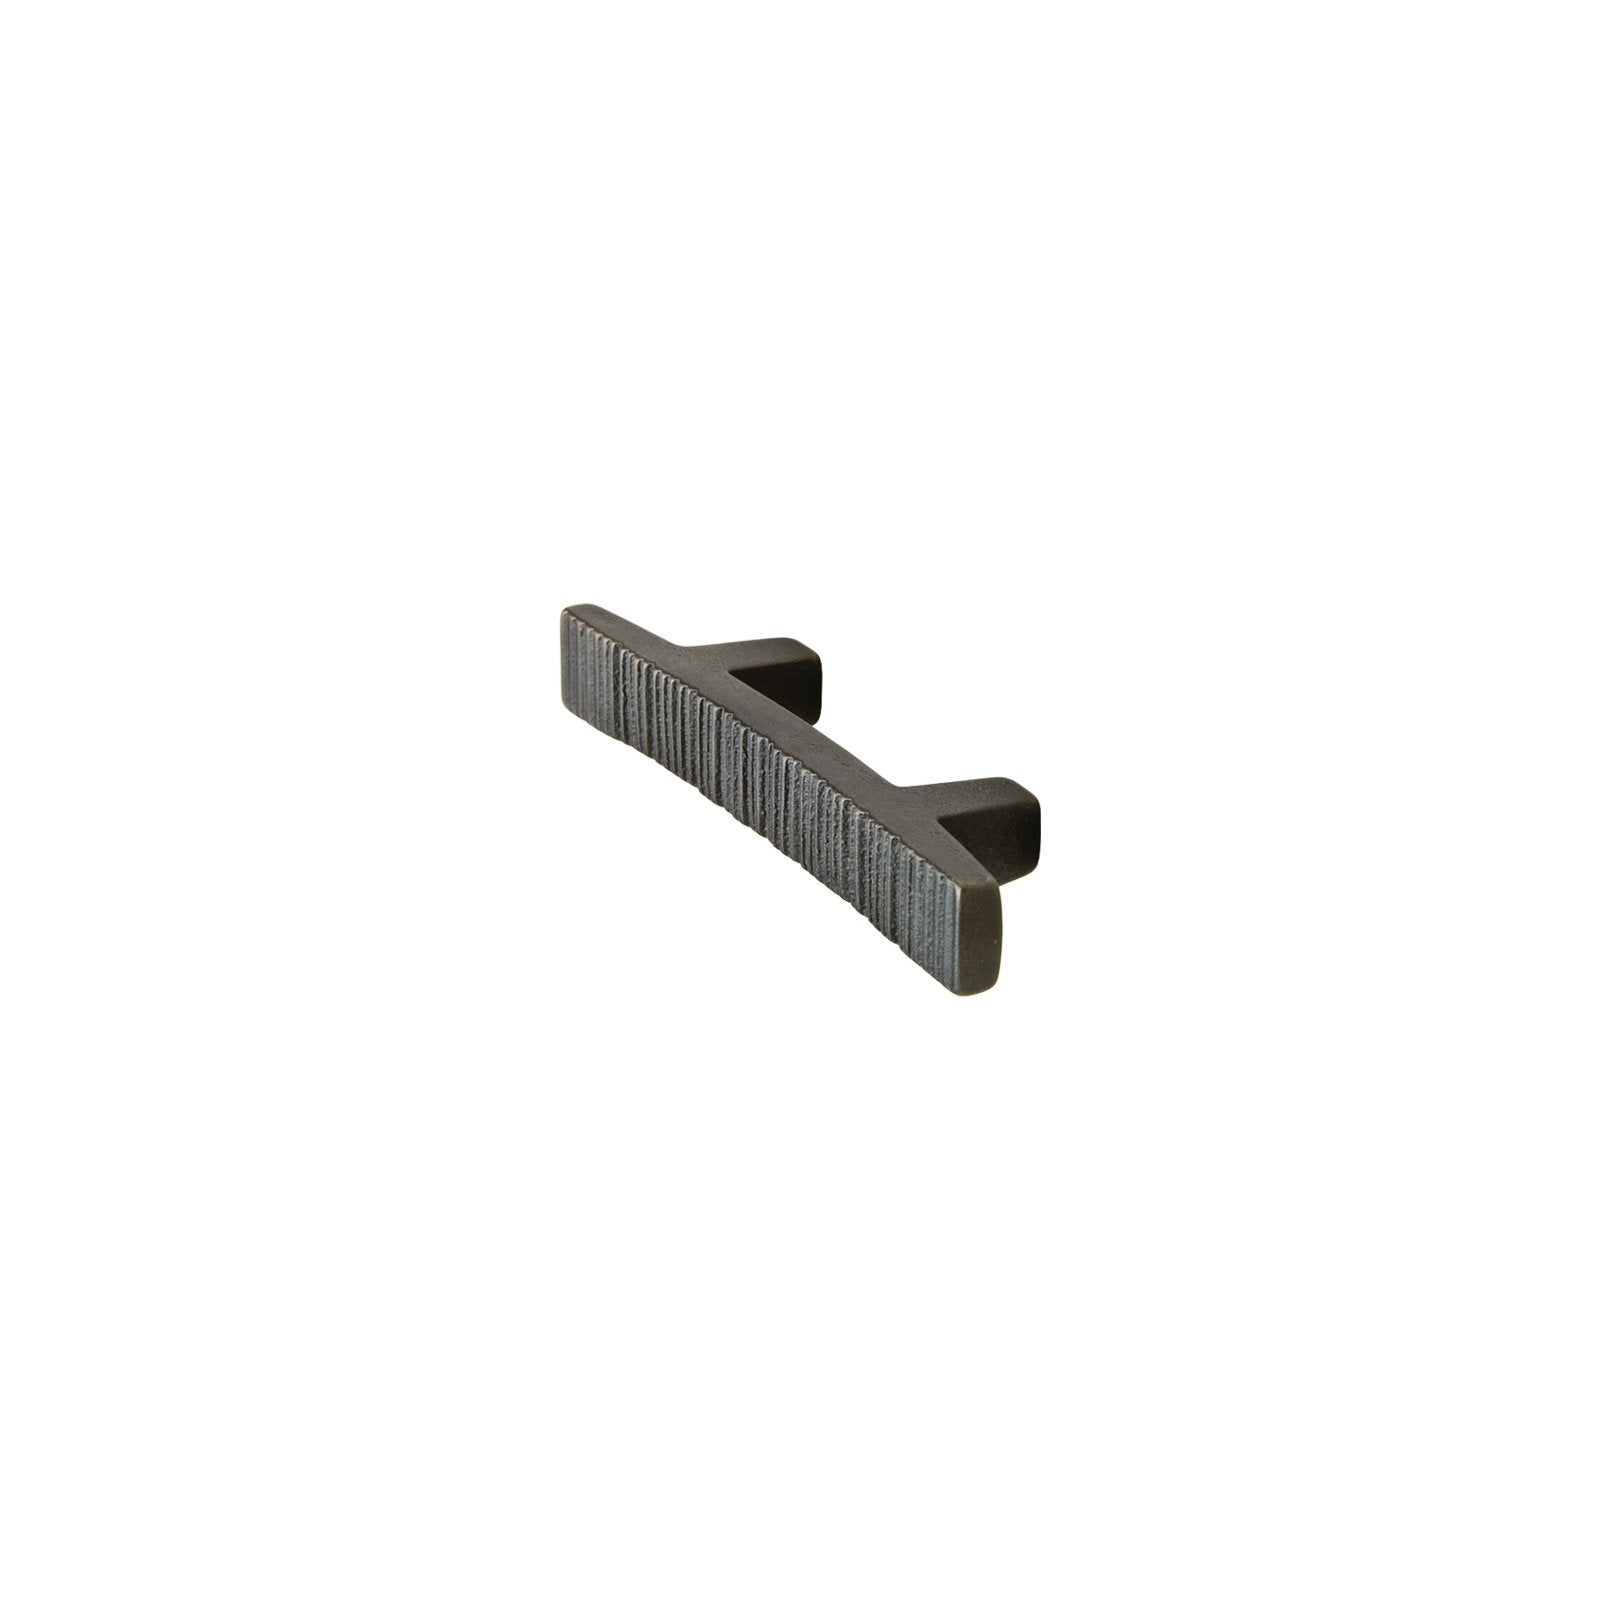 Rocky Mountain Hardware CK20040 - 2 9/16" C-to-C Brut Cabinet Pull